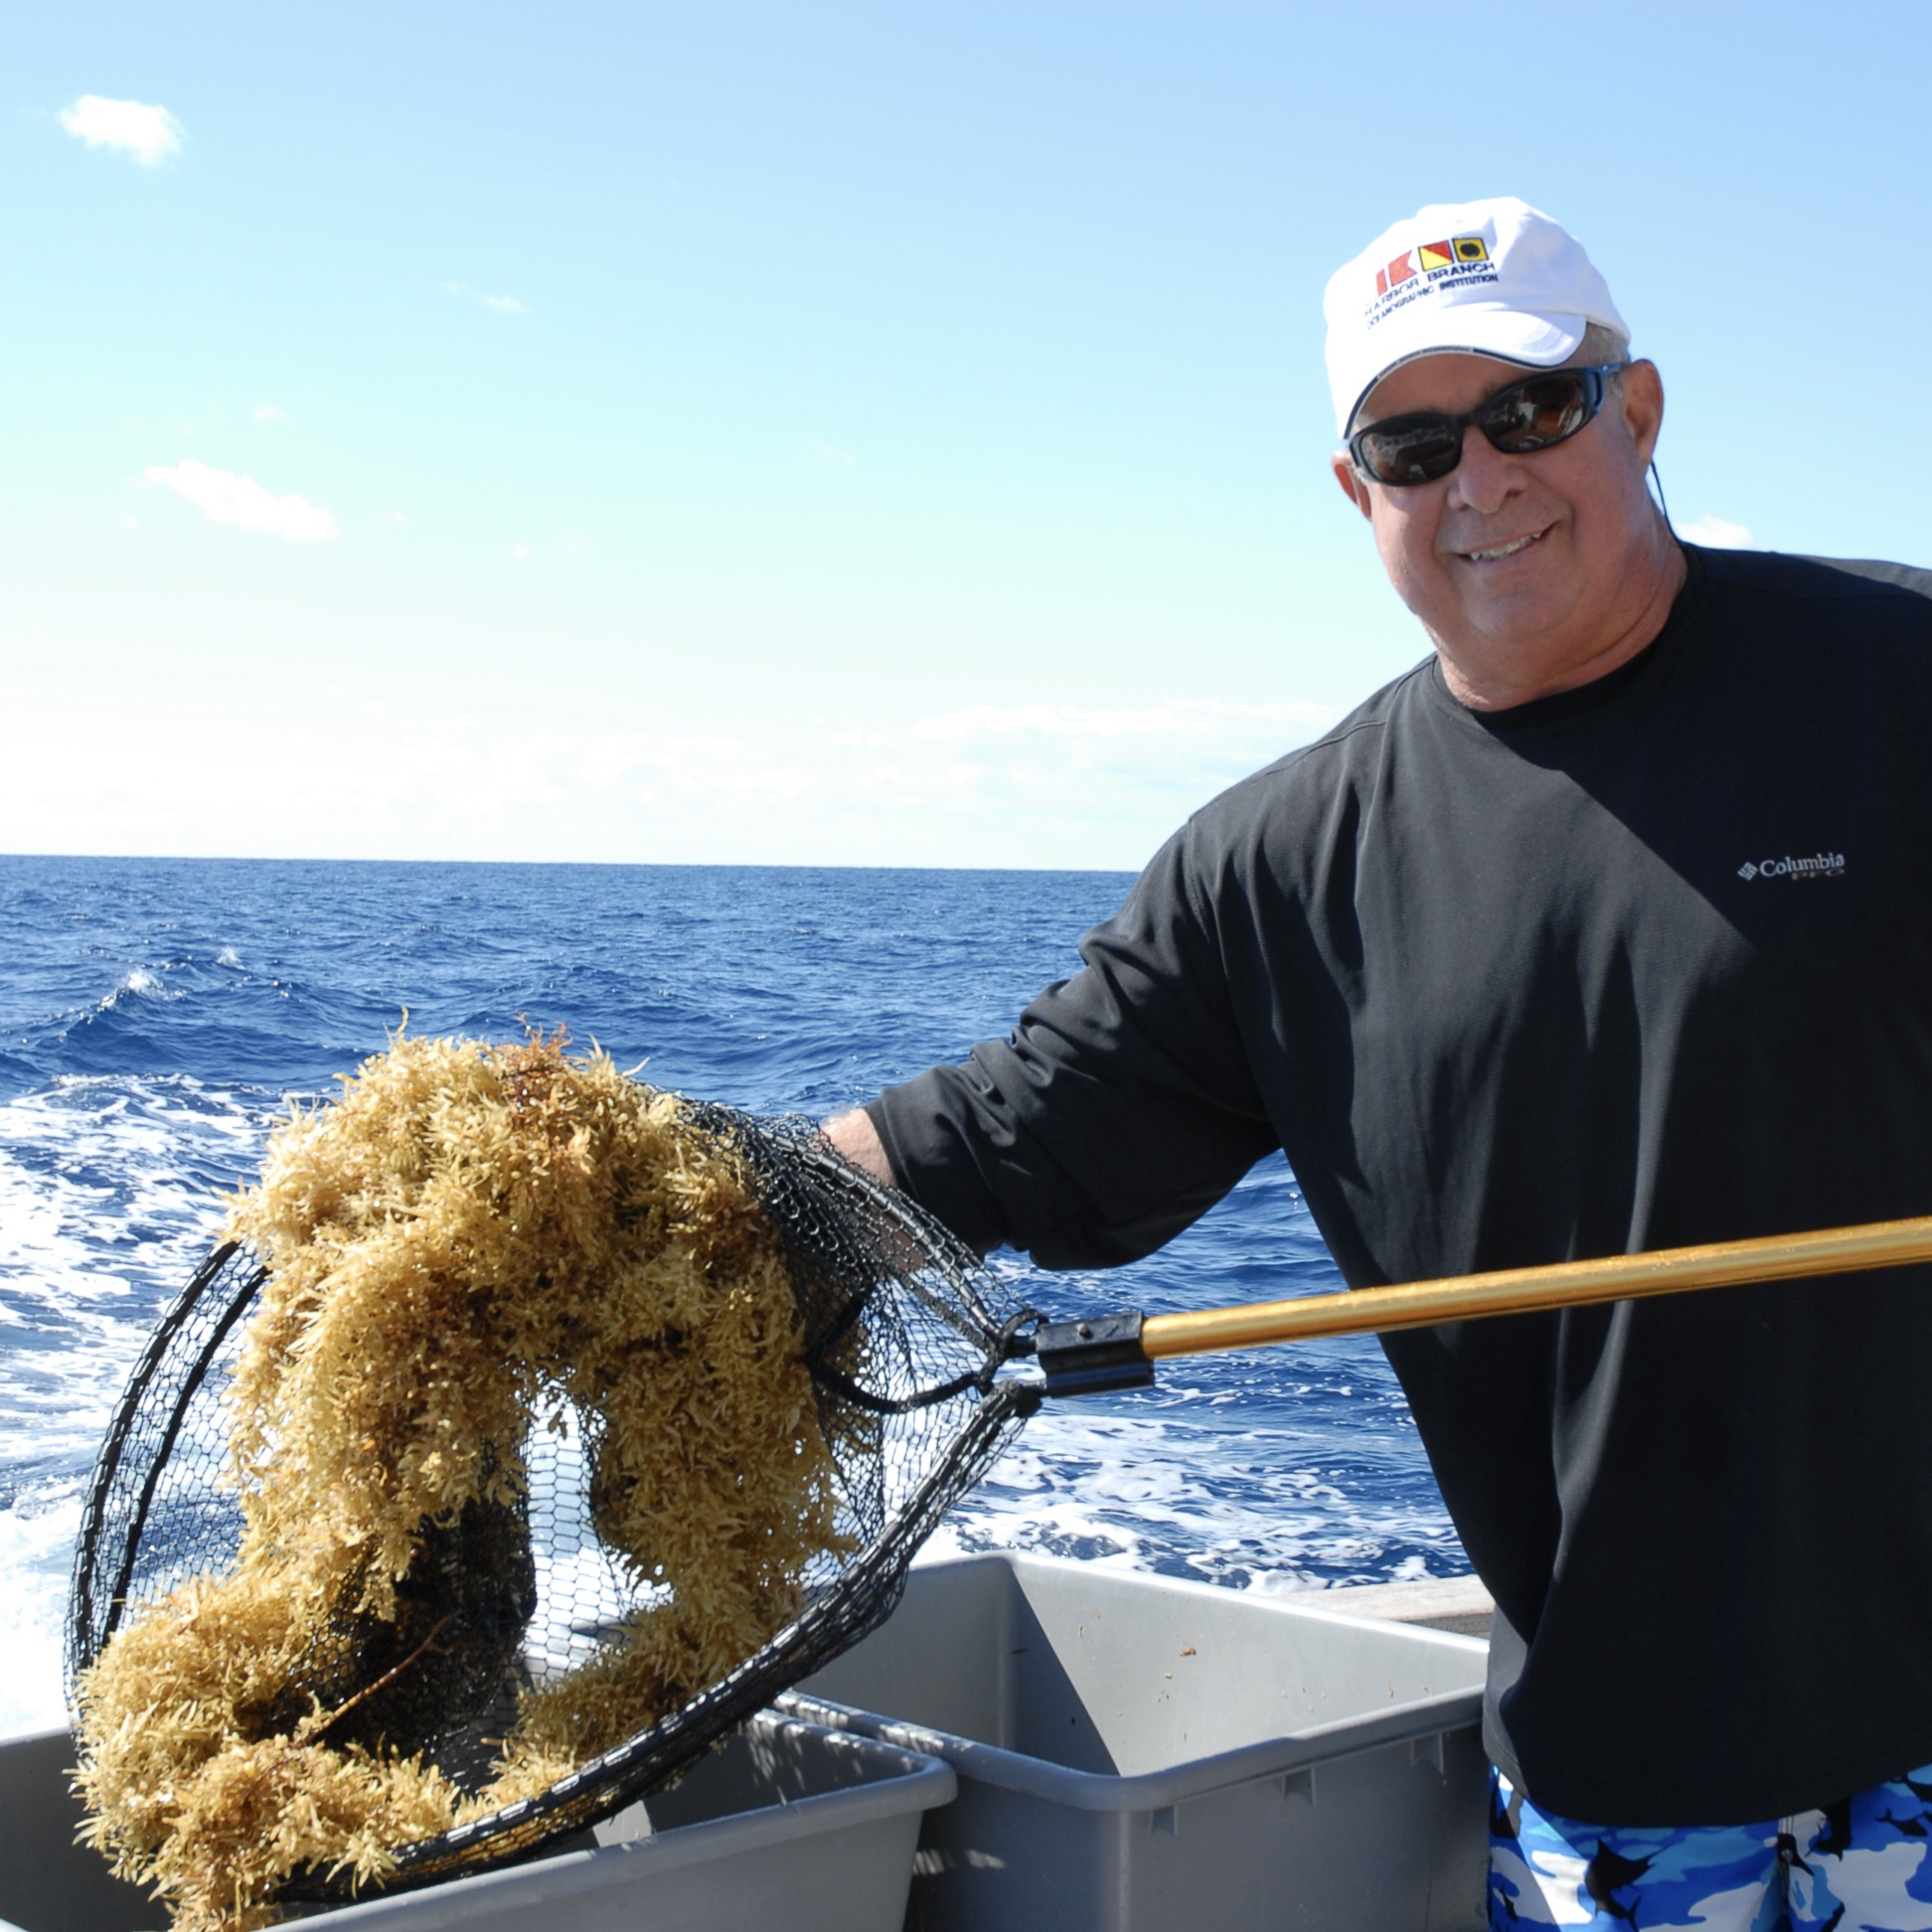 One Of The Best Ways To Collect Sargassum Is To Simply To Use A Net.